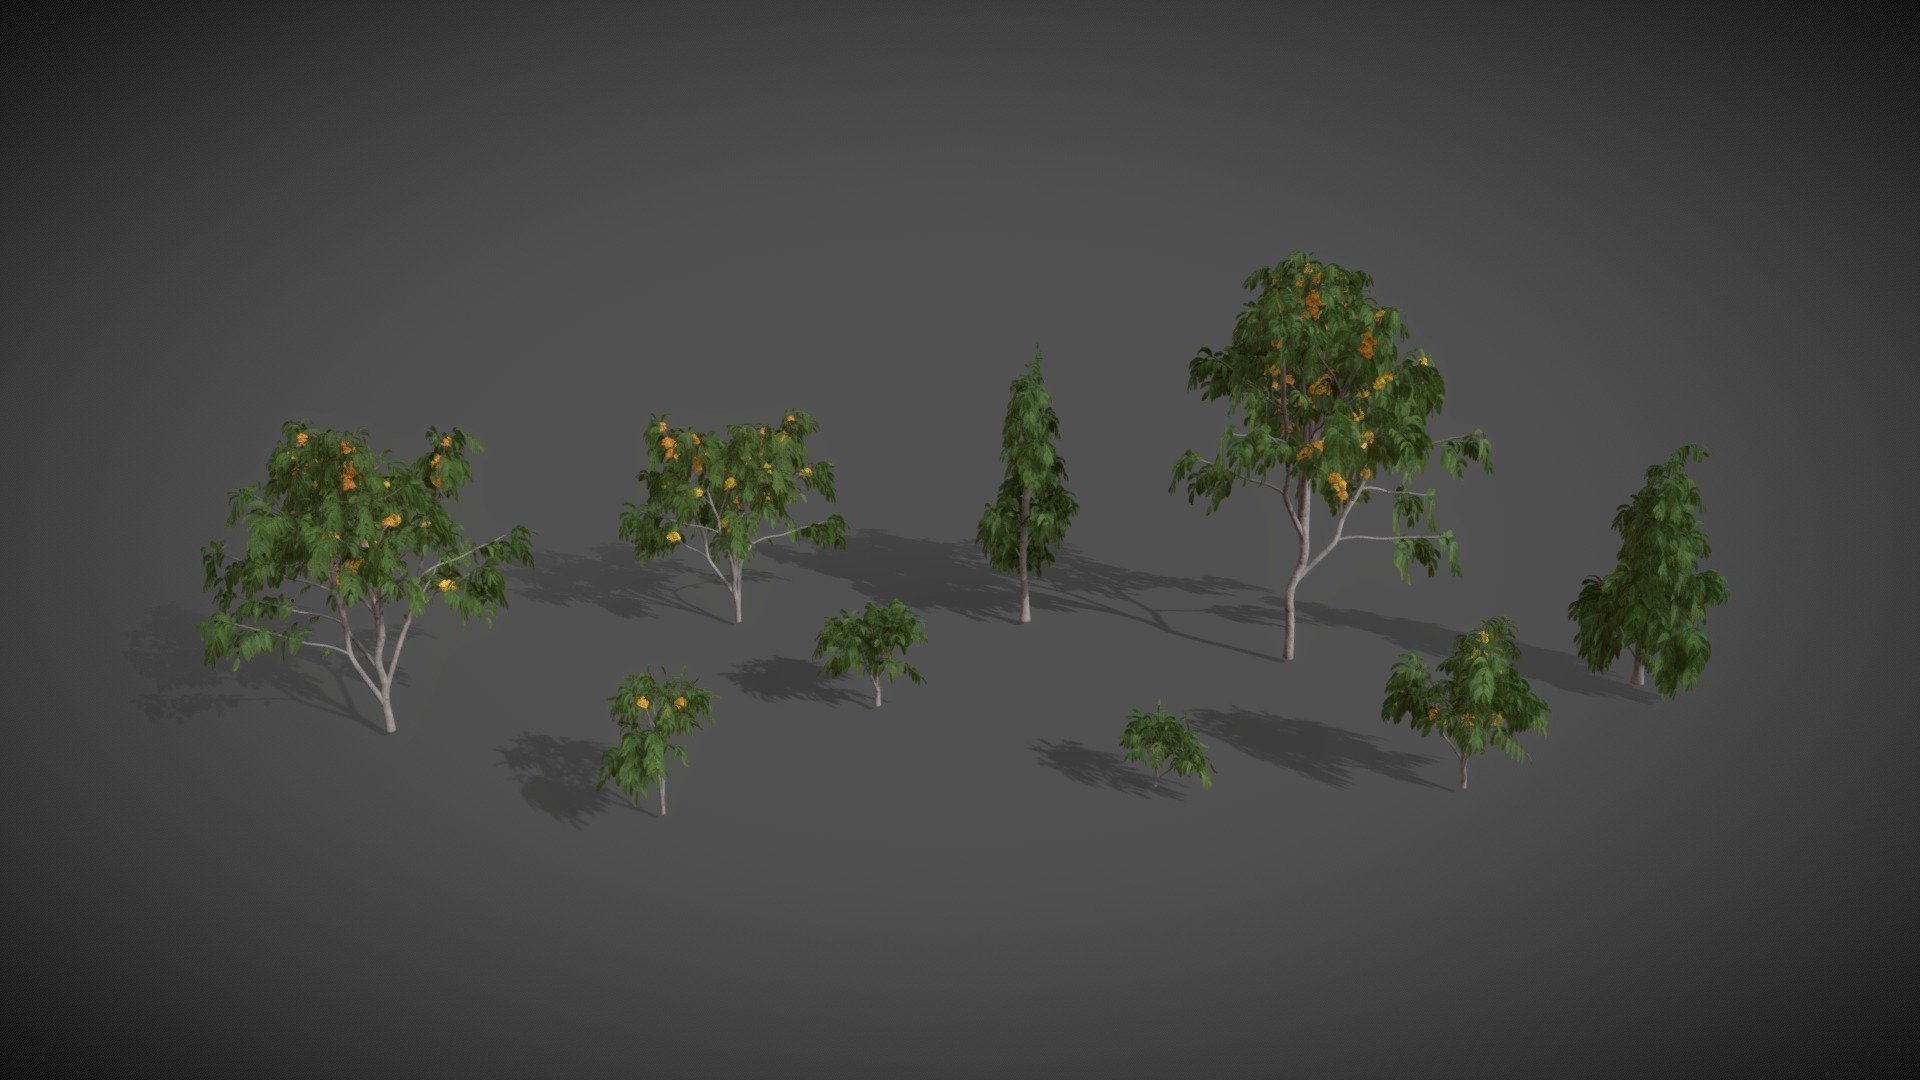 This XfrogPlants Ashoka Tree 3D model collection contains nine highly detailed, fully textured variations of the plant at different ages.

Download includes textures and 5 useful and versatile formats: Blender EEVEE, fbx, obj, Unity, and Unreal. 

Tree, evergreen flowering
Height: up to 10 m
Origin: central India
Environment: rainforest
Climate: warm, humid

Notes:
The Ashoka Tree is famous for its brightly-colored fragrant flowers. From February to April, the tree grows large bunches of its vibrant yellow-orange blossoms which darken and turn red before wilting. Though it is widely cultivated, it is a vulnerable species and is becoming rarer in the wild. The Ashoka Tree is considered sacred throughout the Indian subcontinent and has many religious and folkloric associations 3d model